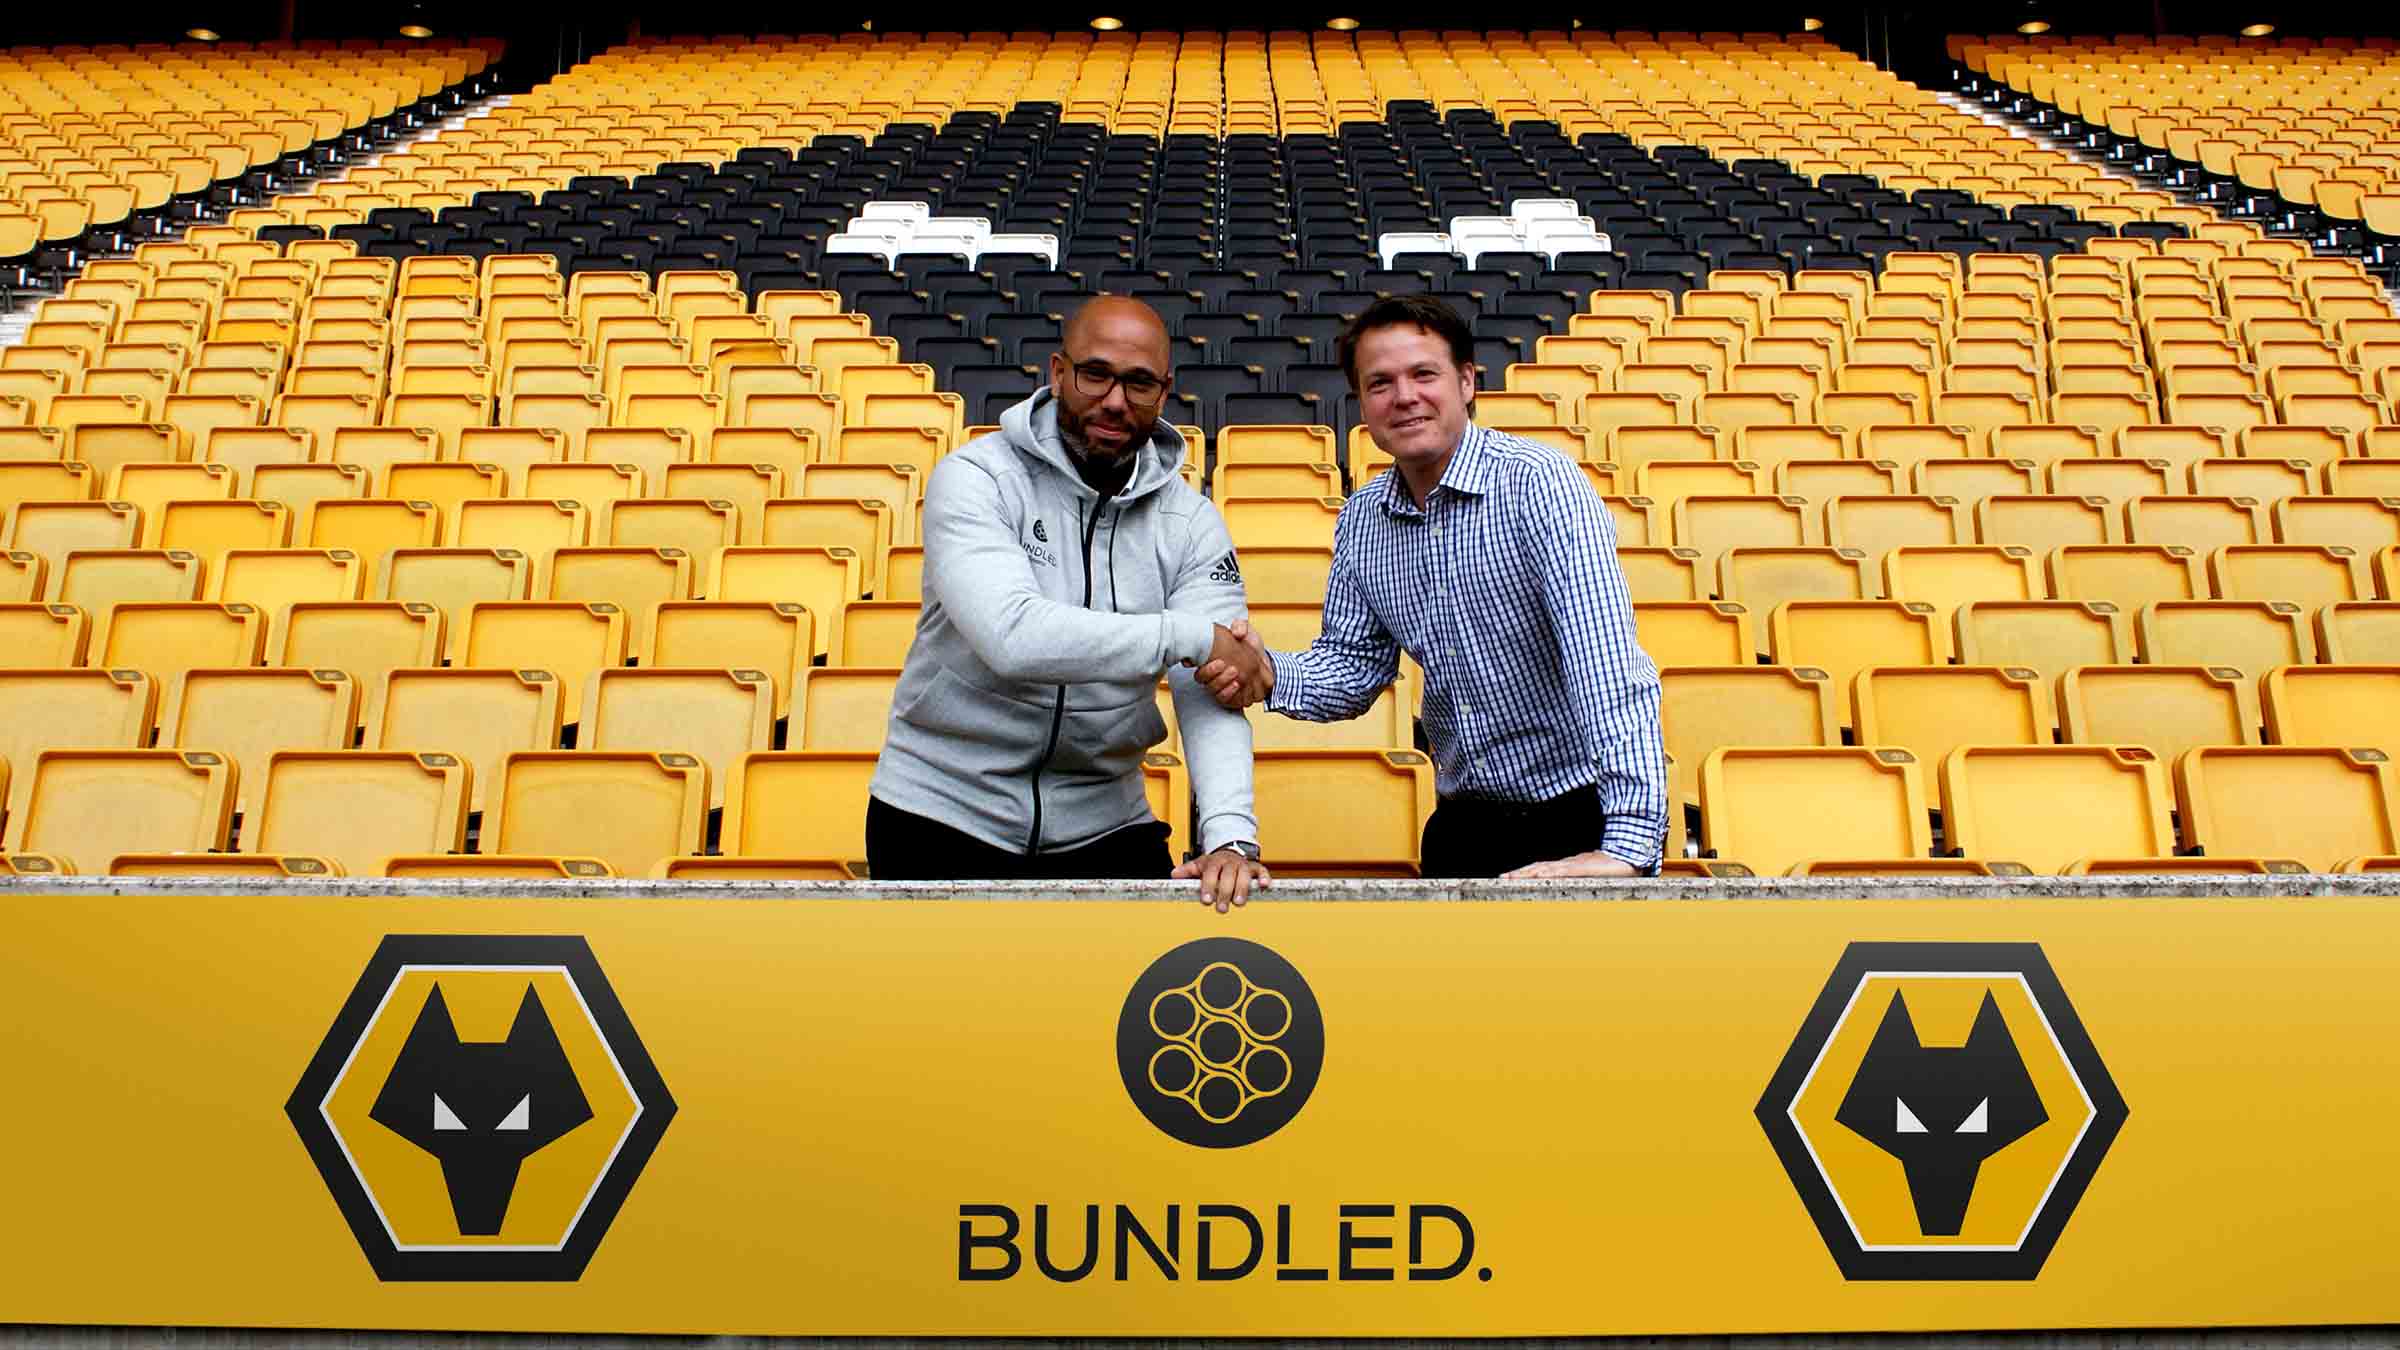 Bundled are delighted to announce a new partnership with Wolverhampton Wanderers FC